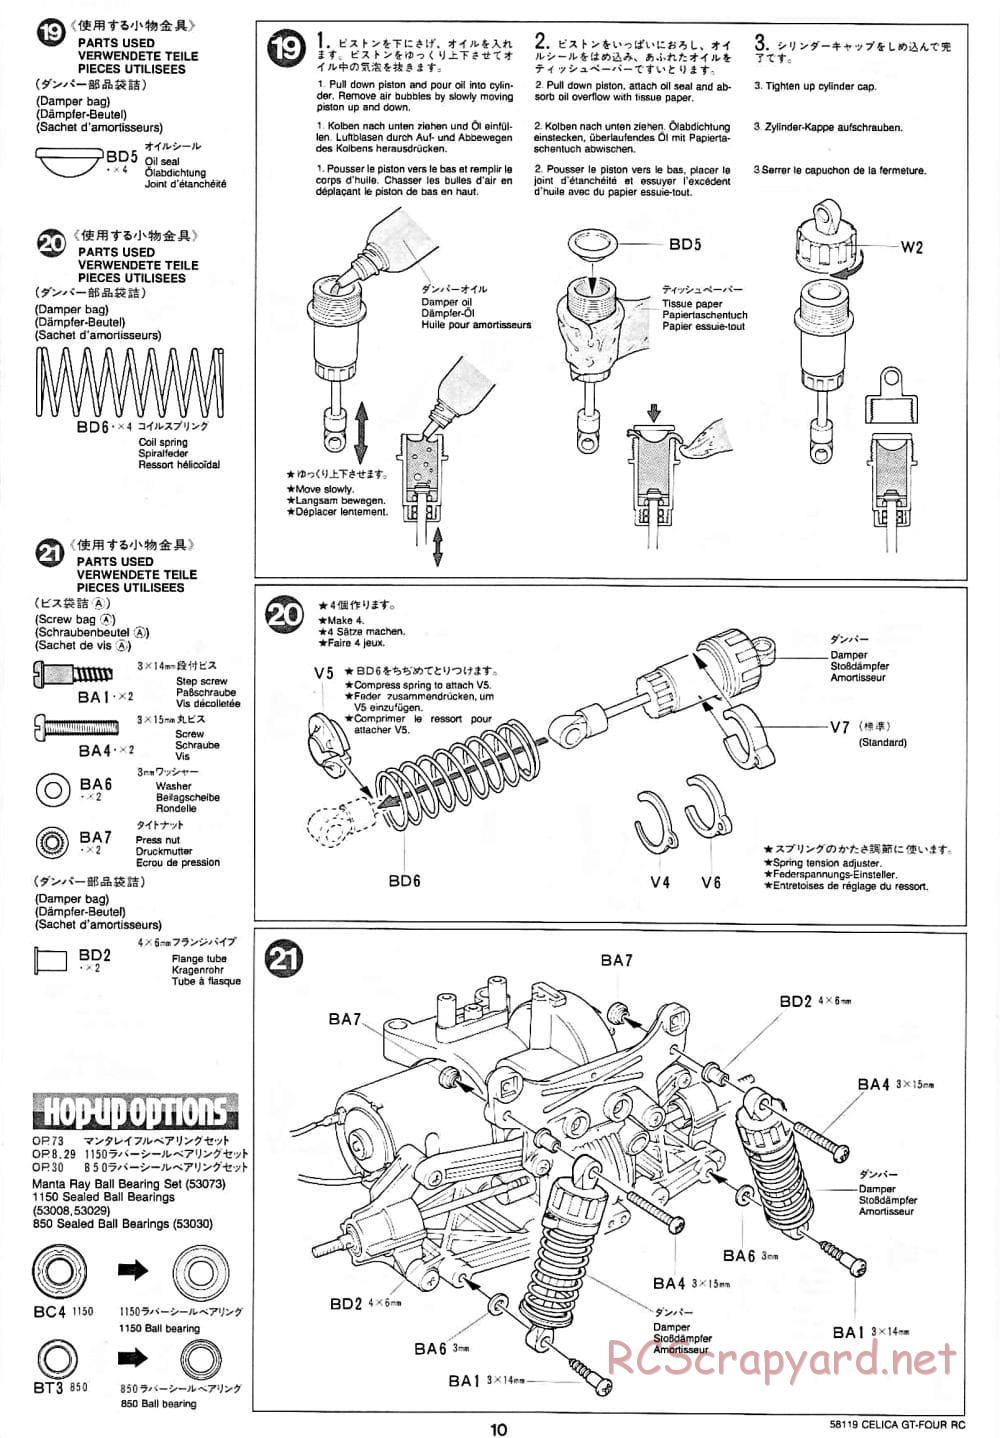 Tamiya - Toyota Celica GT-Four RC - TA-01 Chassis - Manual - Page 10